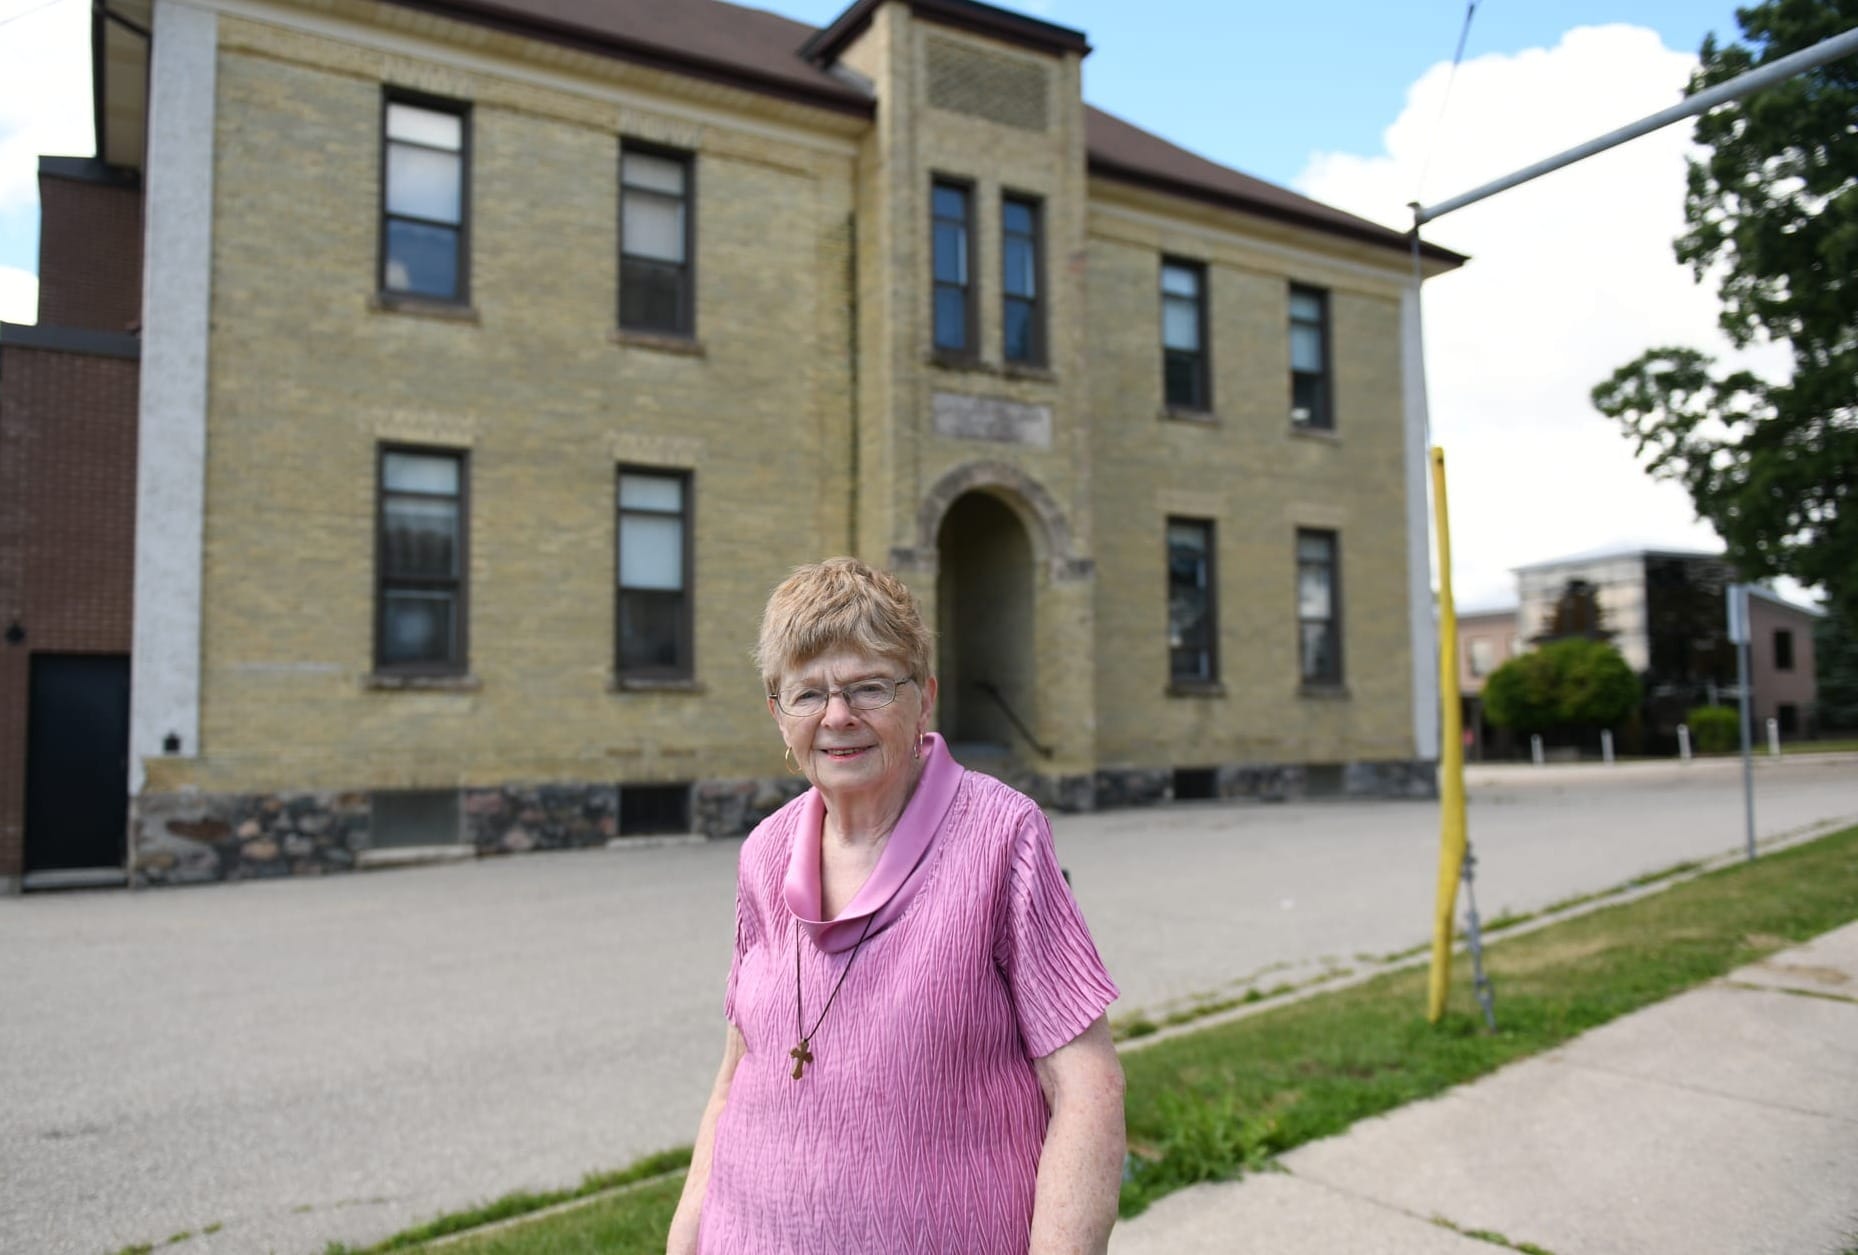 Maryhill residents still waiting to hear what’s next for St. Boniface site